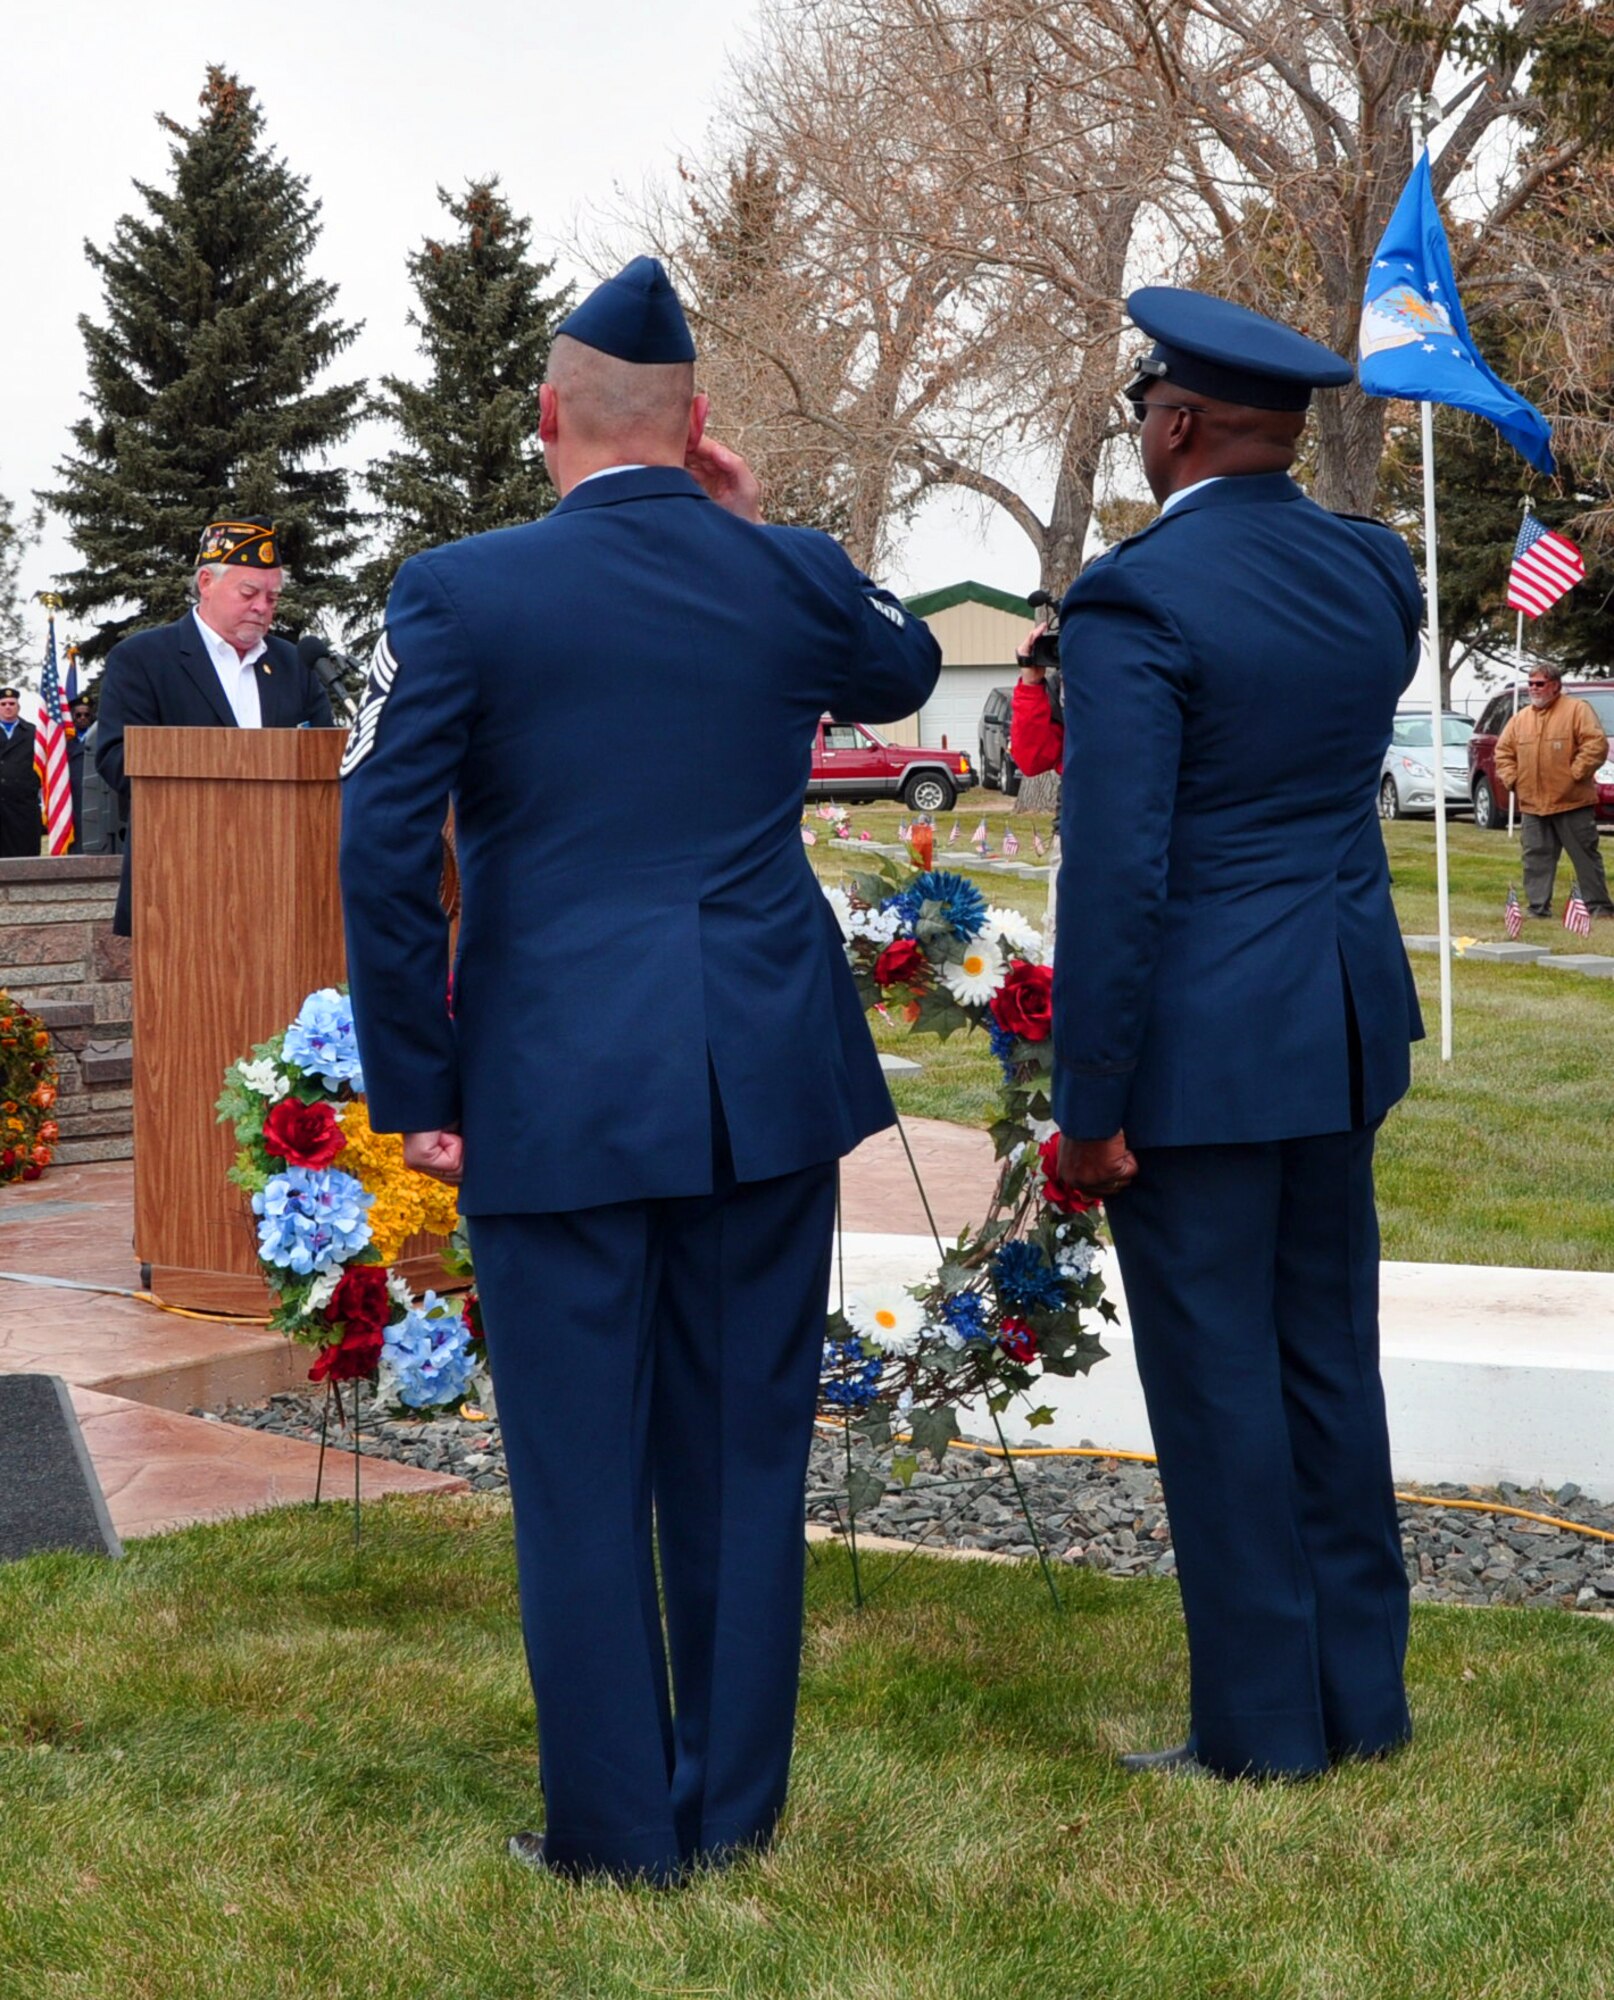 131111-F-CP692-023 Col. Carl Jones, 90th Missile Wing vice commander, and Chief Master Sgt. Mike Garrou, 90th MW command chief, render a salute after laying a wreath at a Veterans Day Ceremony at Beth El Cemetery, Cheyenne, Wyo., Nov. 11. More than 200 people attended the ceremony to pay tribute and remember the nation’s veterans. (U.S. Air Force photo by 1st Lt. Eydie Sakura)